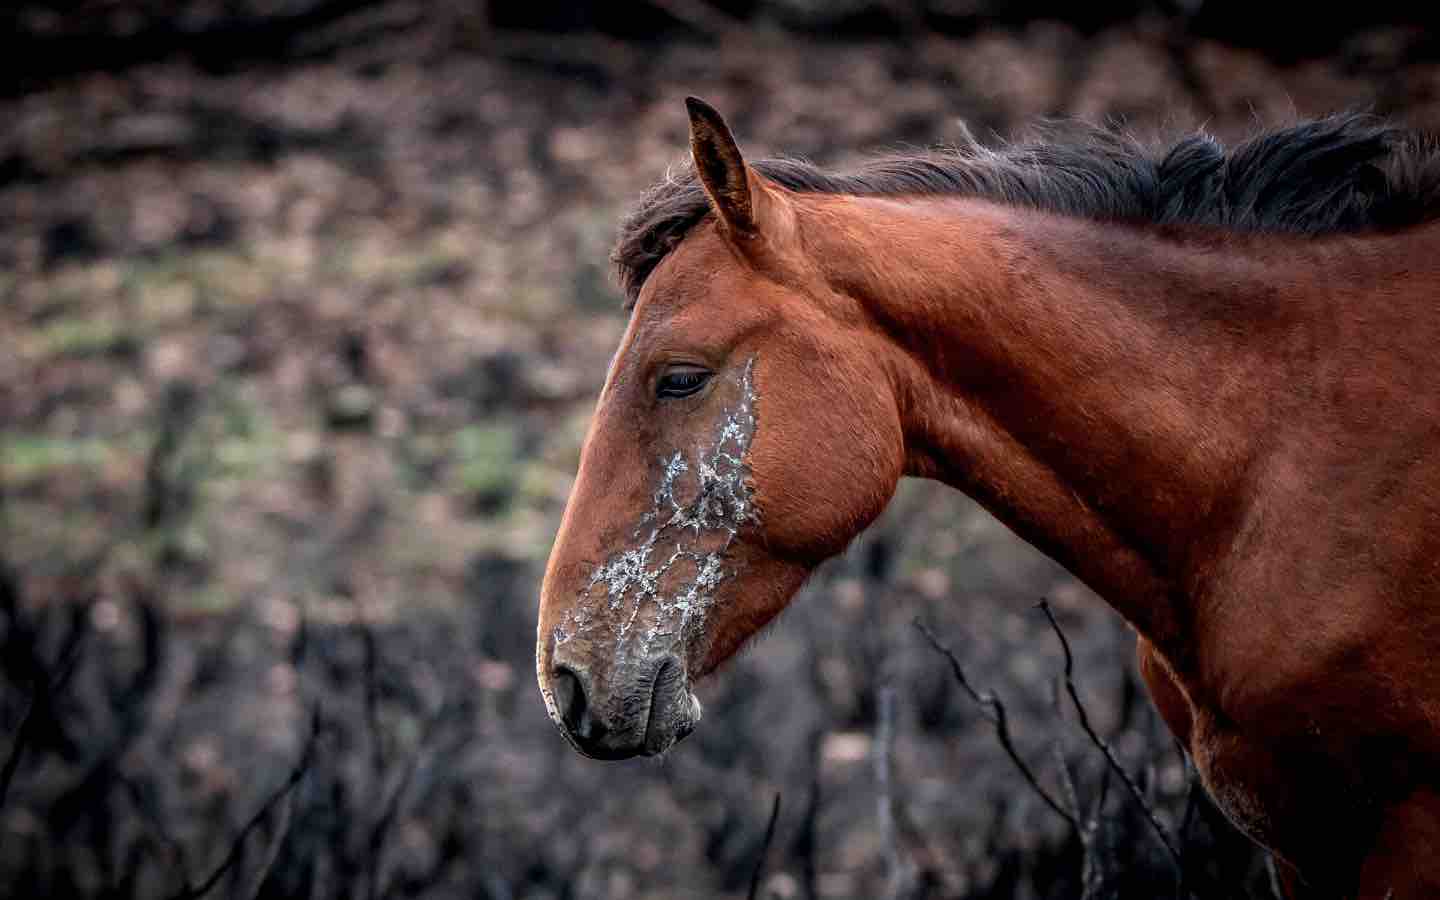 Potential Health Issues Of Brumby Horses